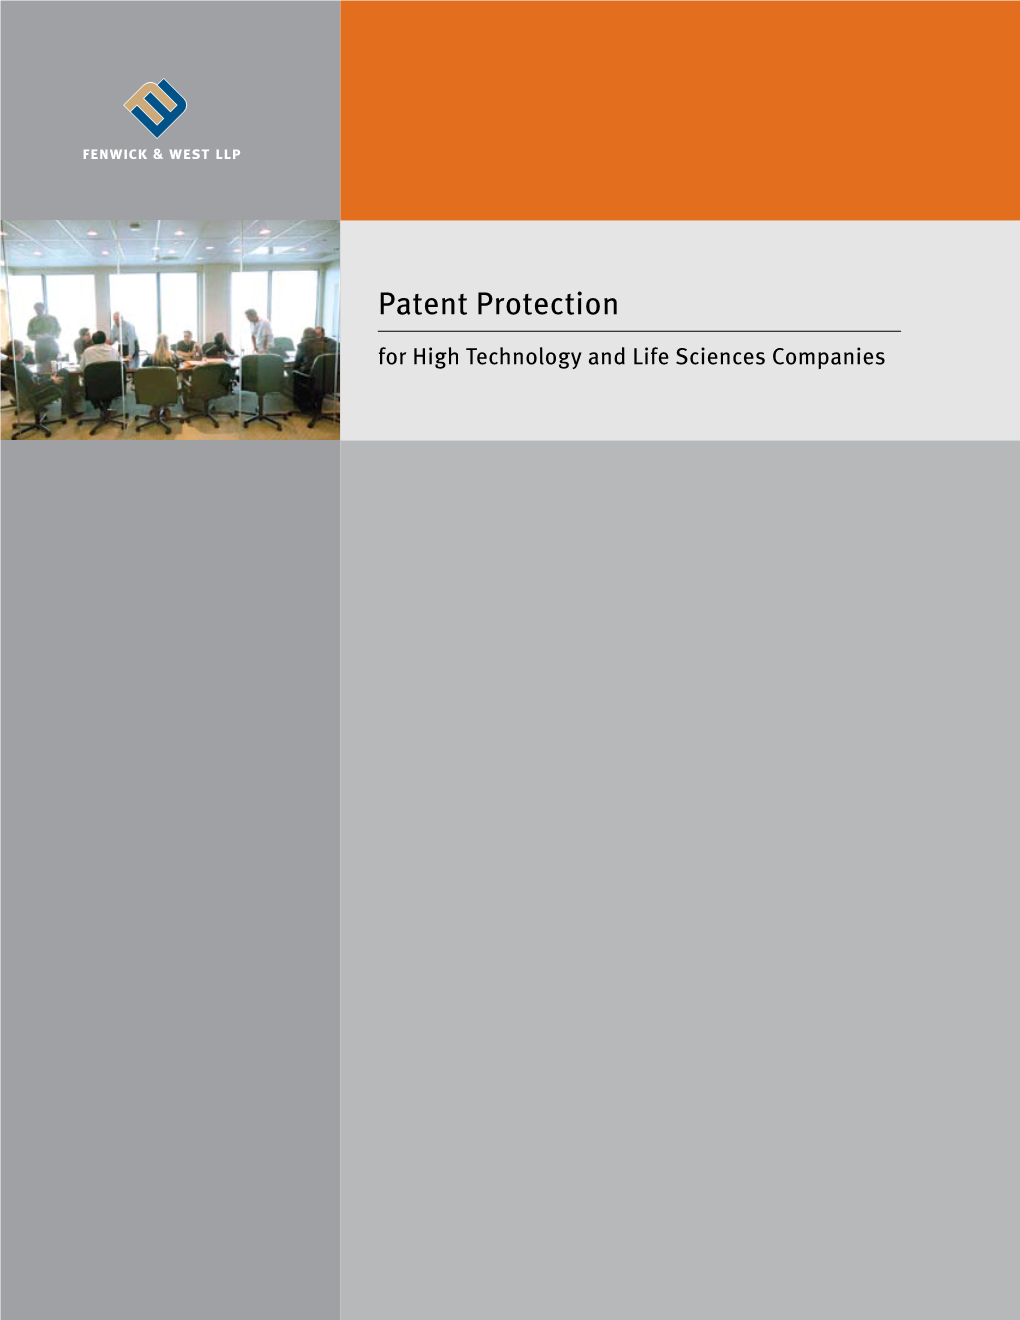 Patent Protection for High Technology and Life Sciences Companies About the Firm